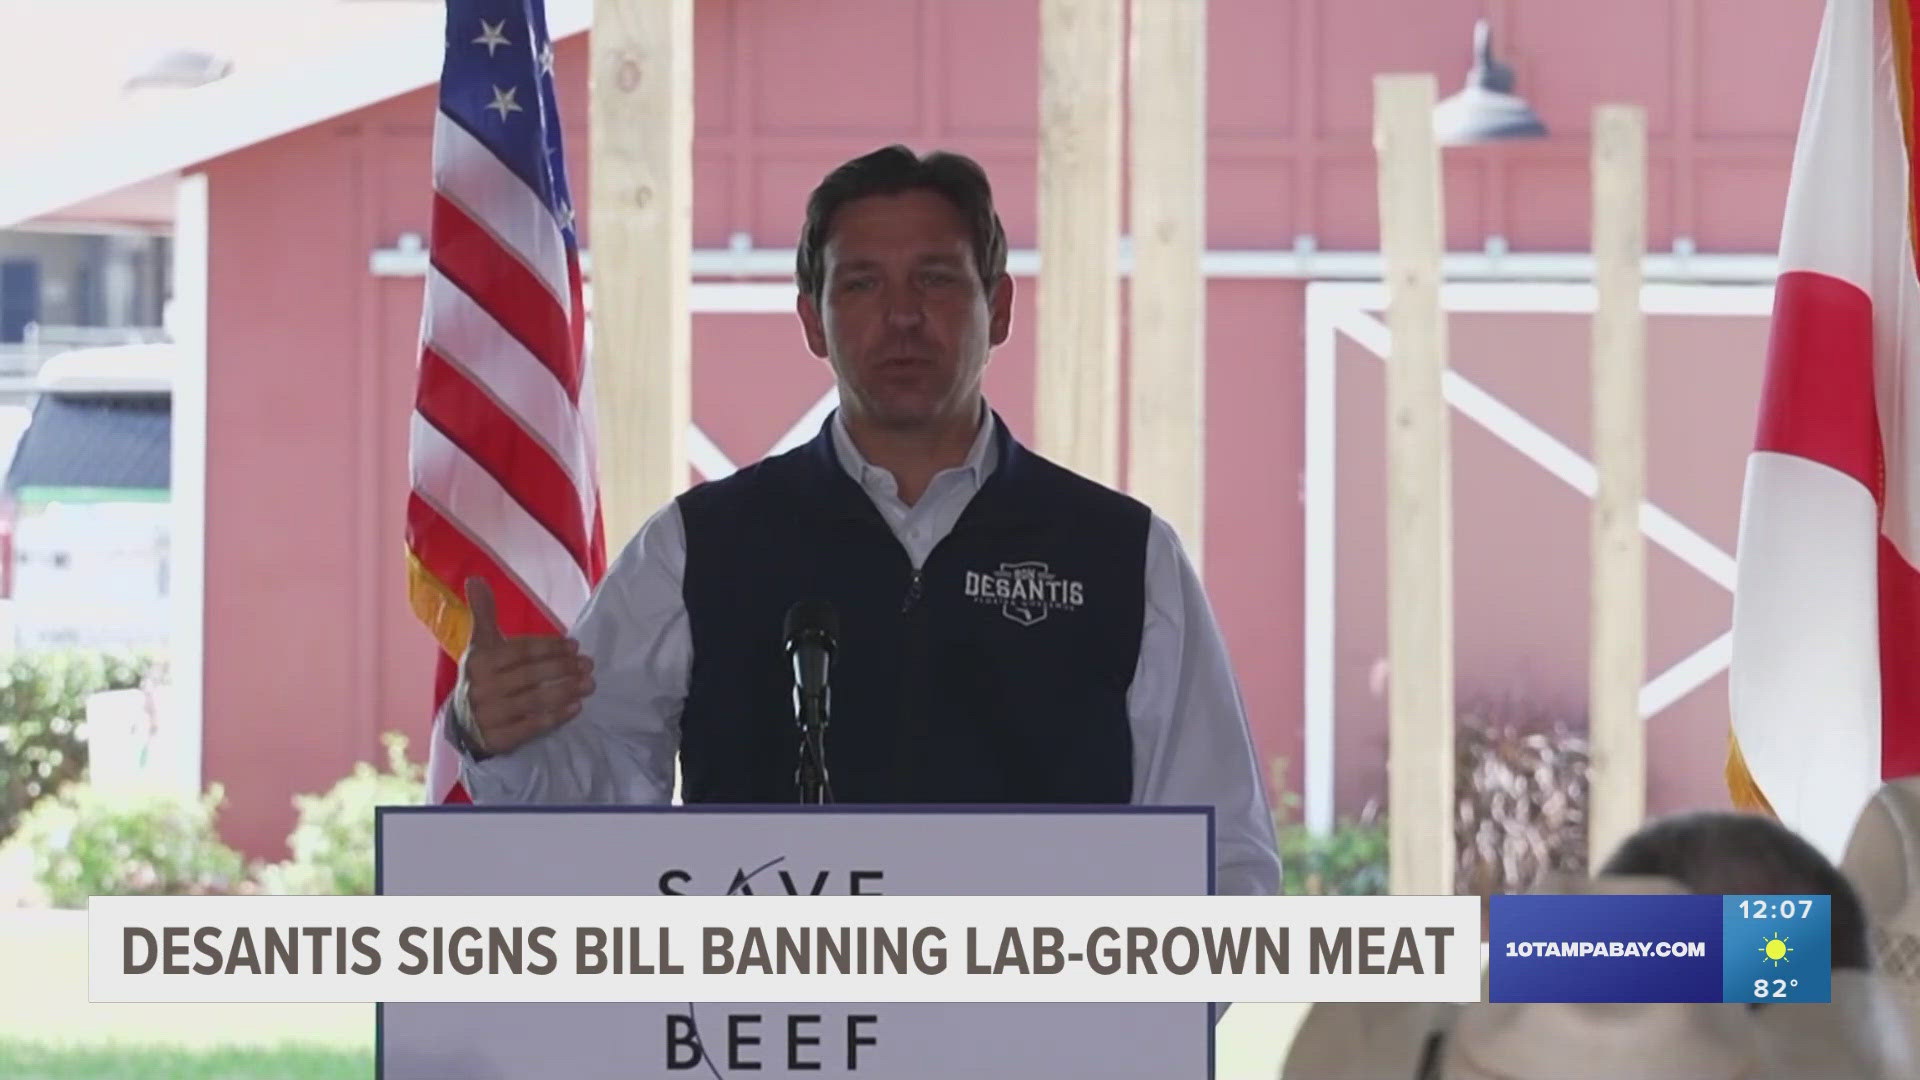 The Florida Republican signed the new law at a press conference in Hardee County.